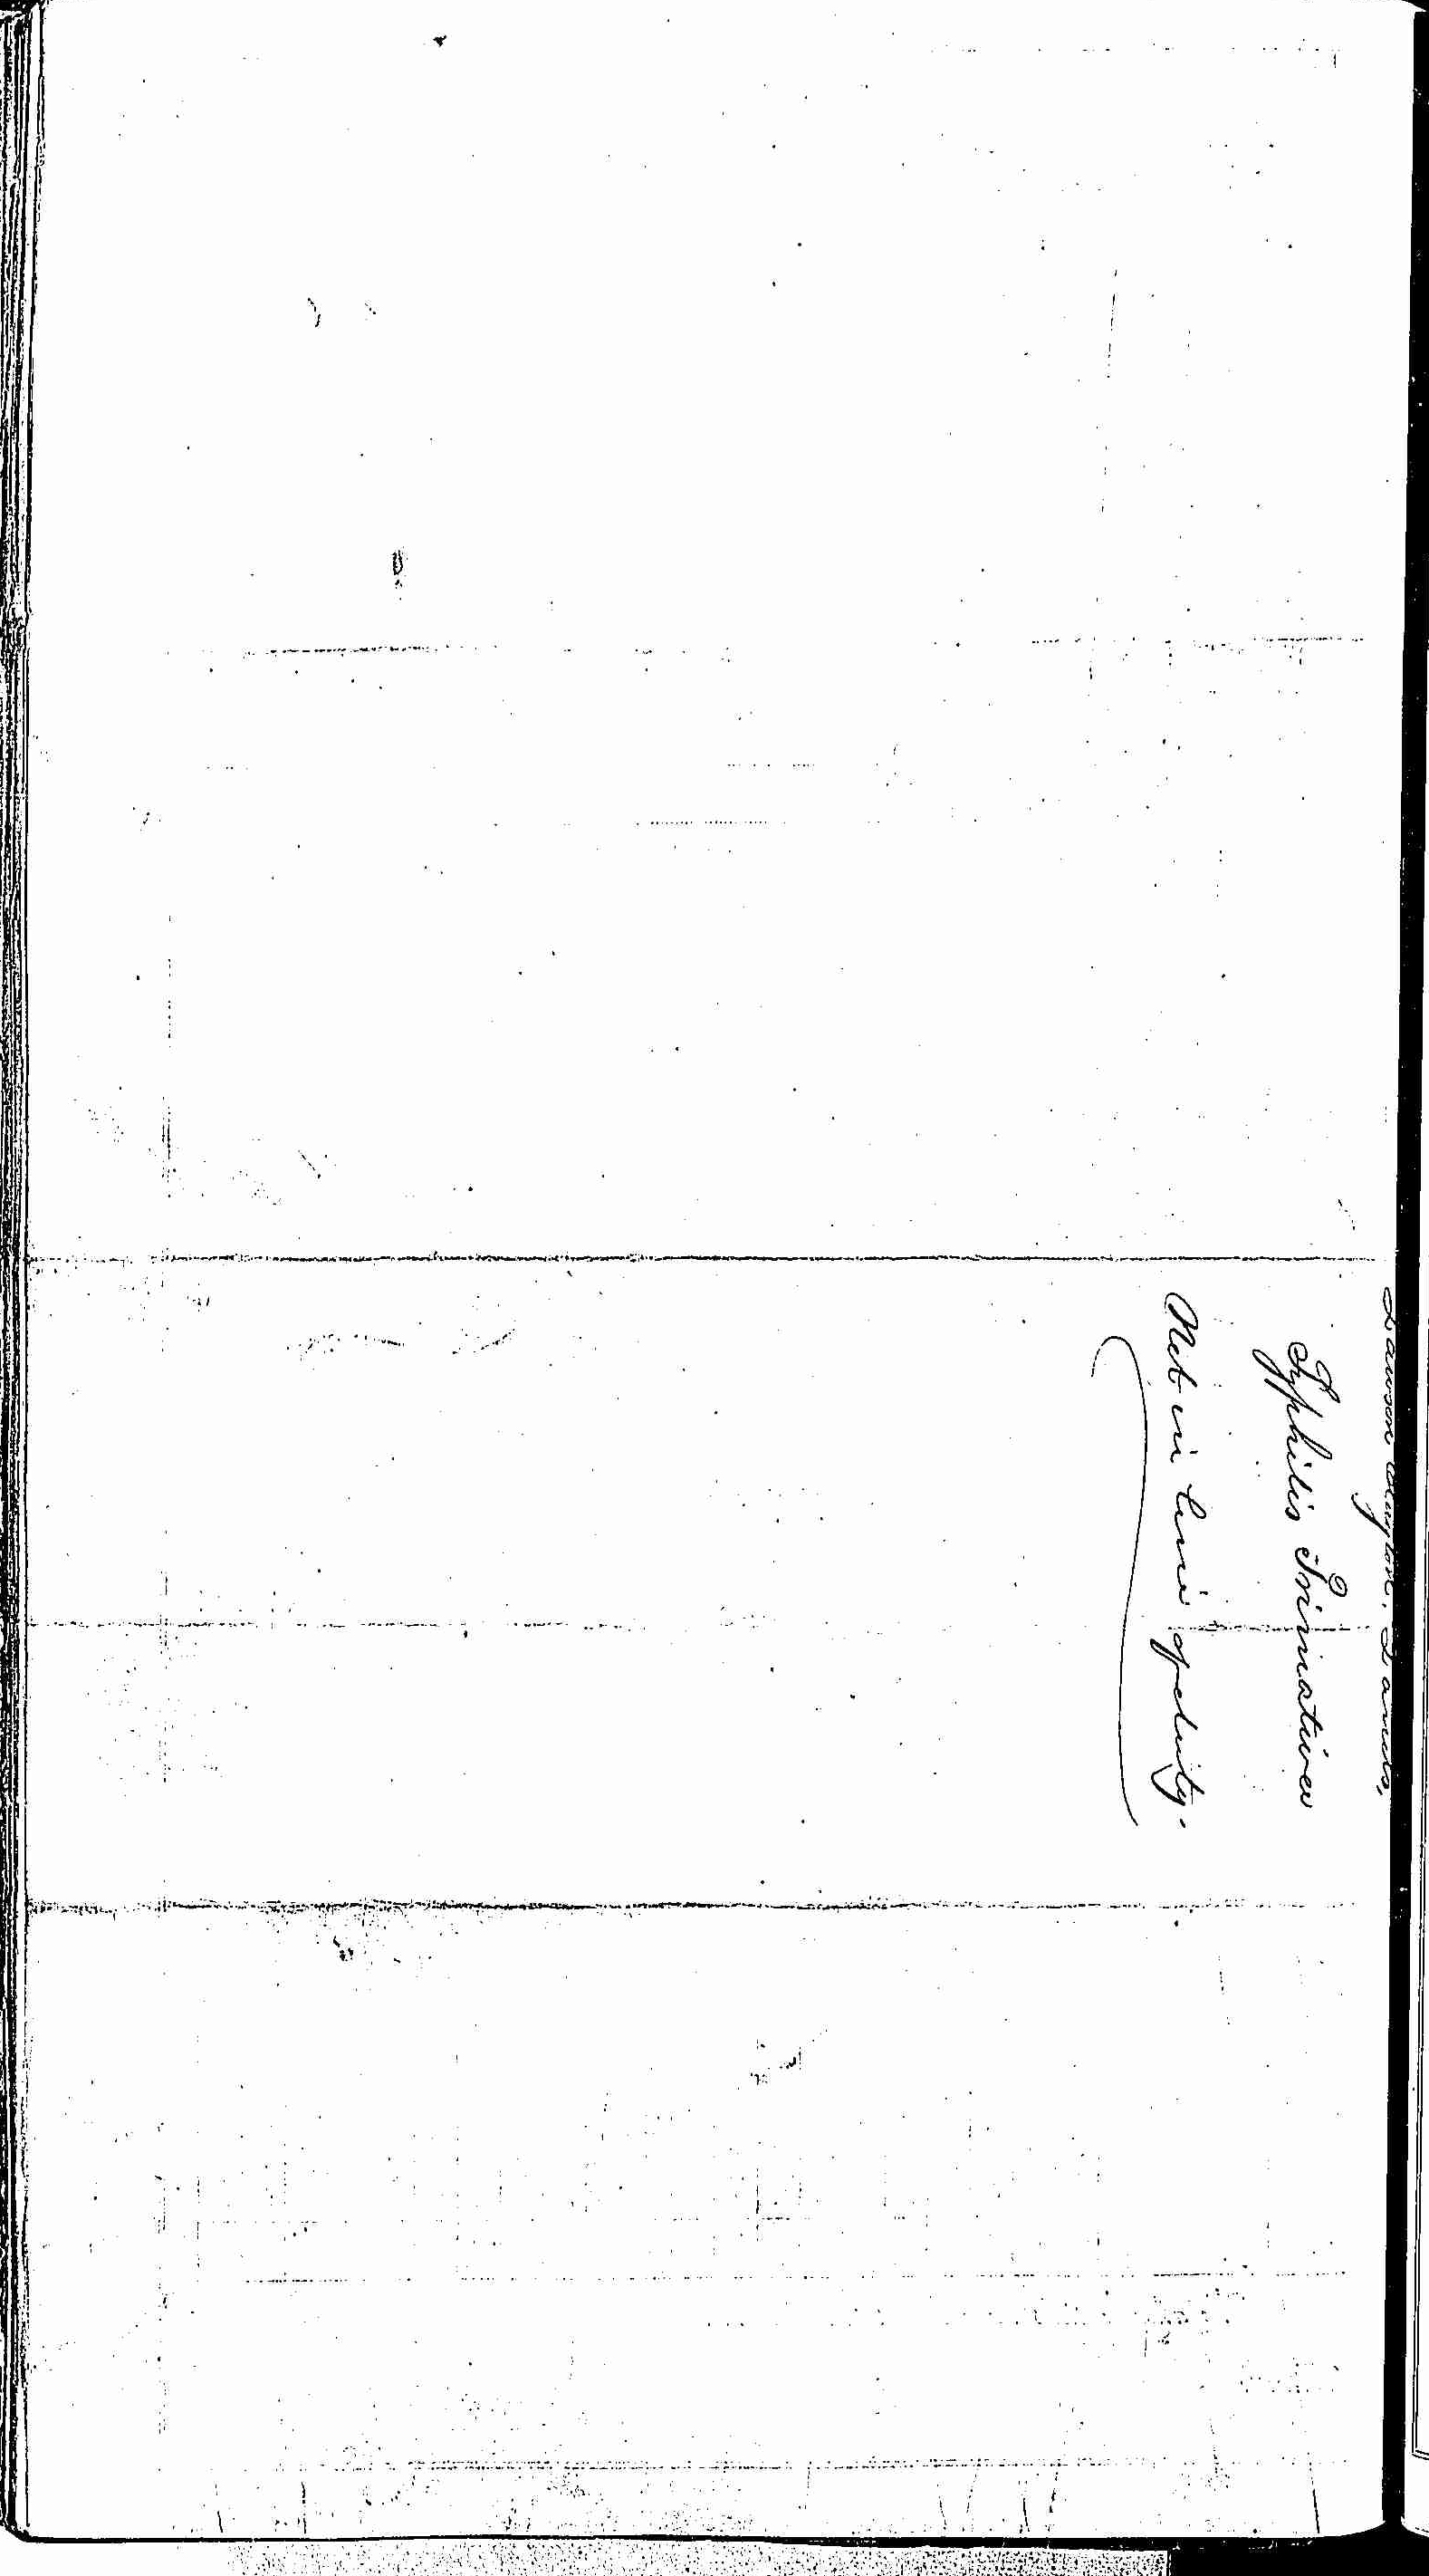 Entry for Lawson Clayton (page 2 of 2) in the log Hospital Tickets and Case Papers - Naval Hospital - Washington, D.C. - 1866-68